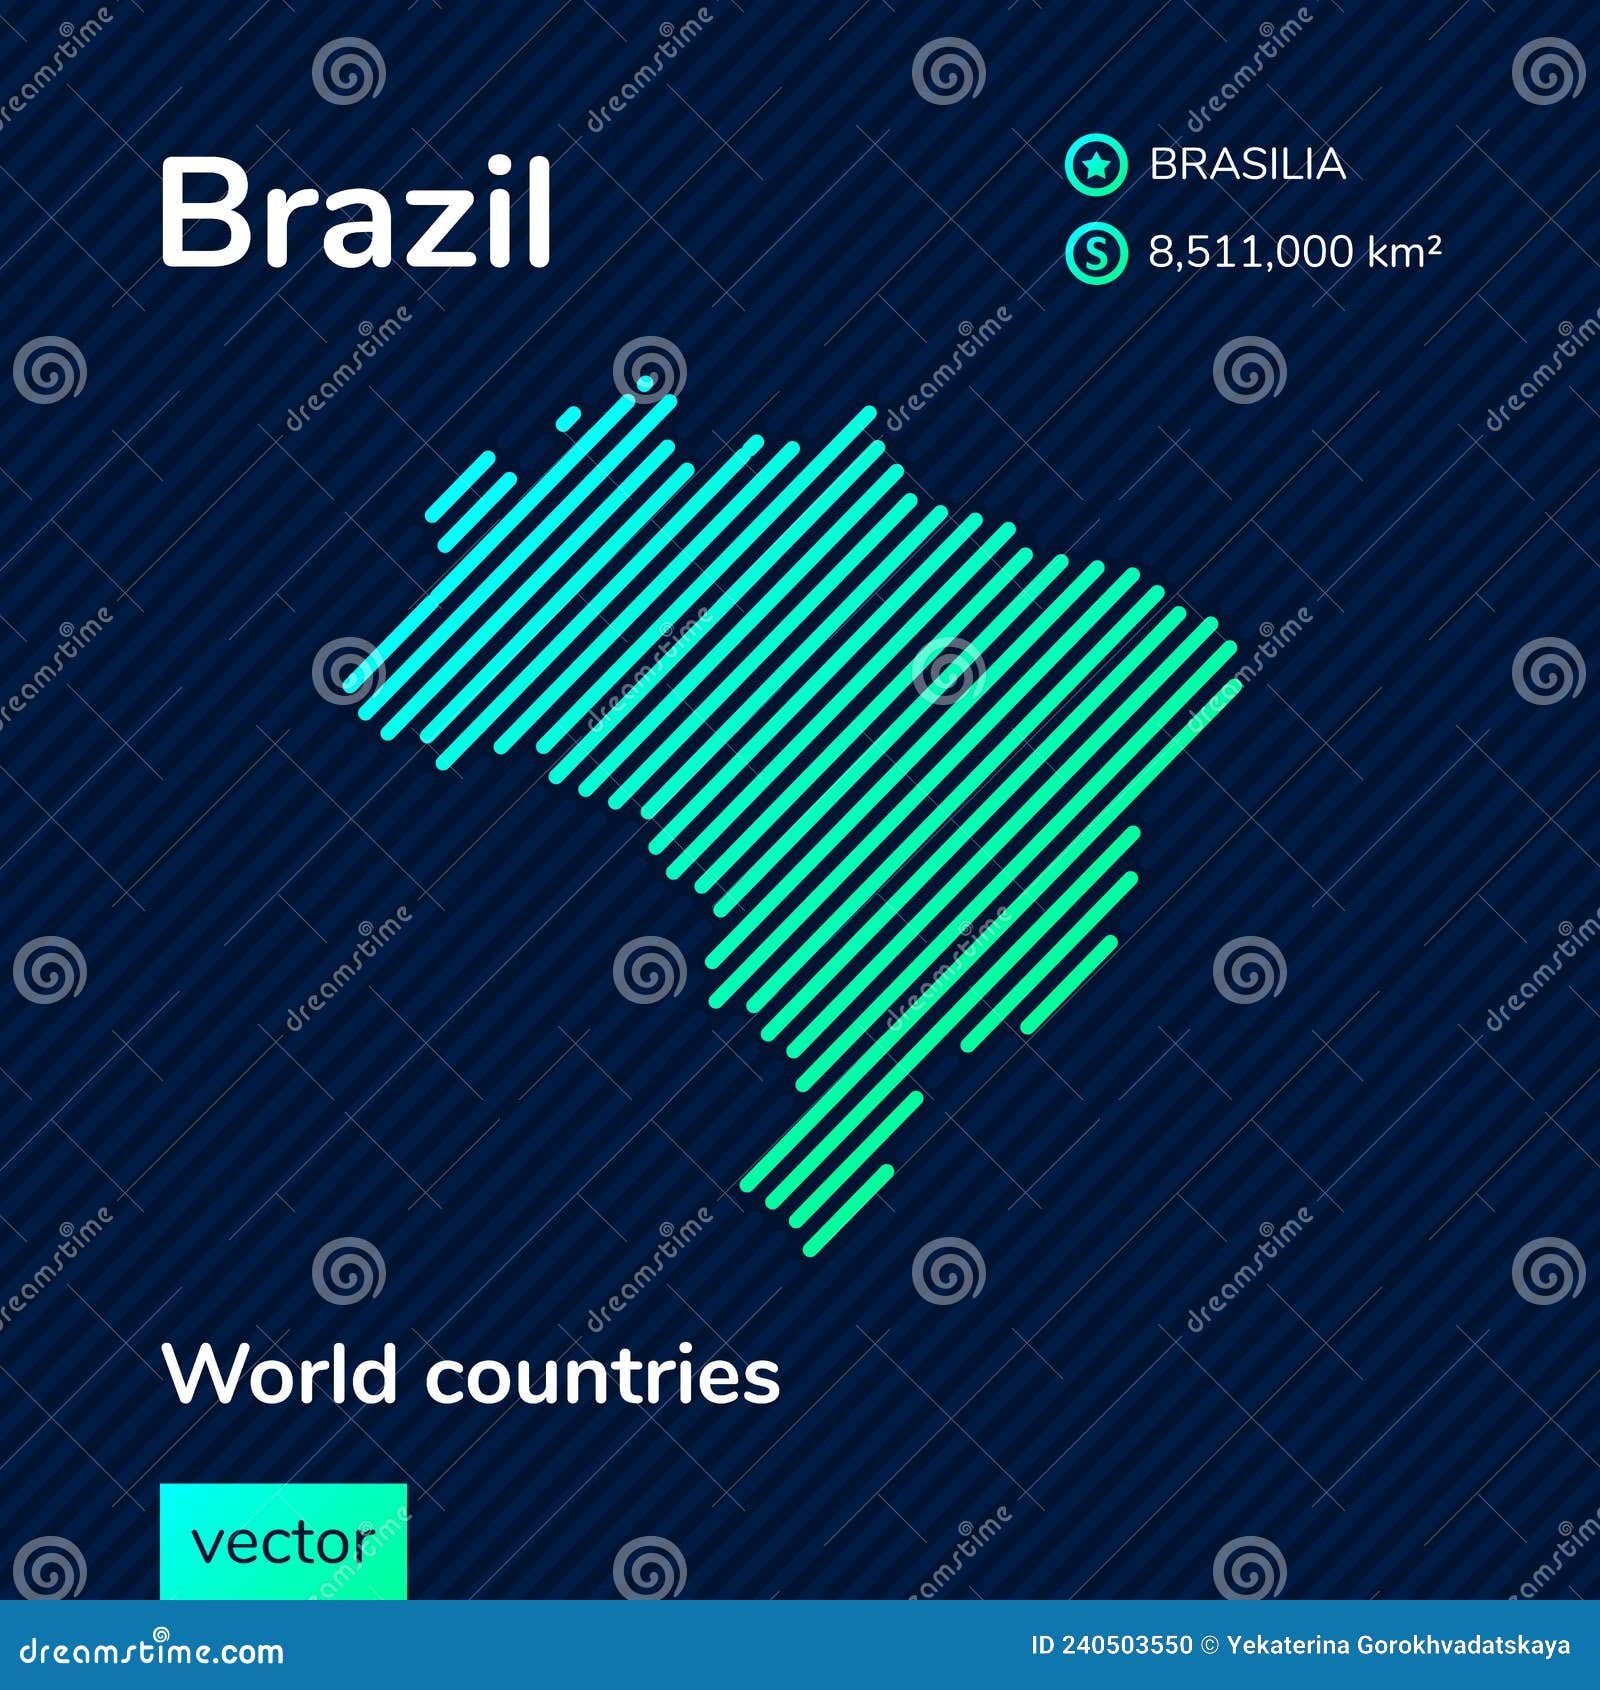 stylized  flat map of brazil in neon green colors on striped dark blue background.